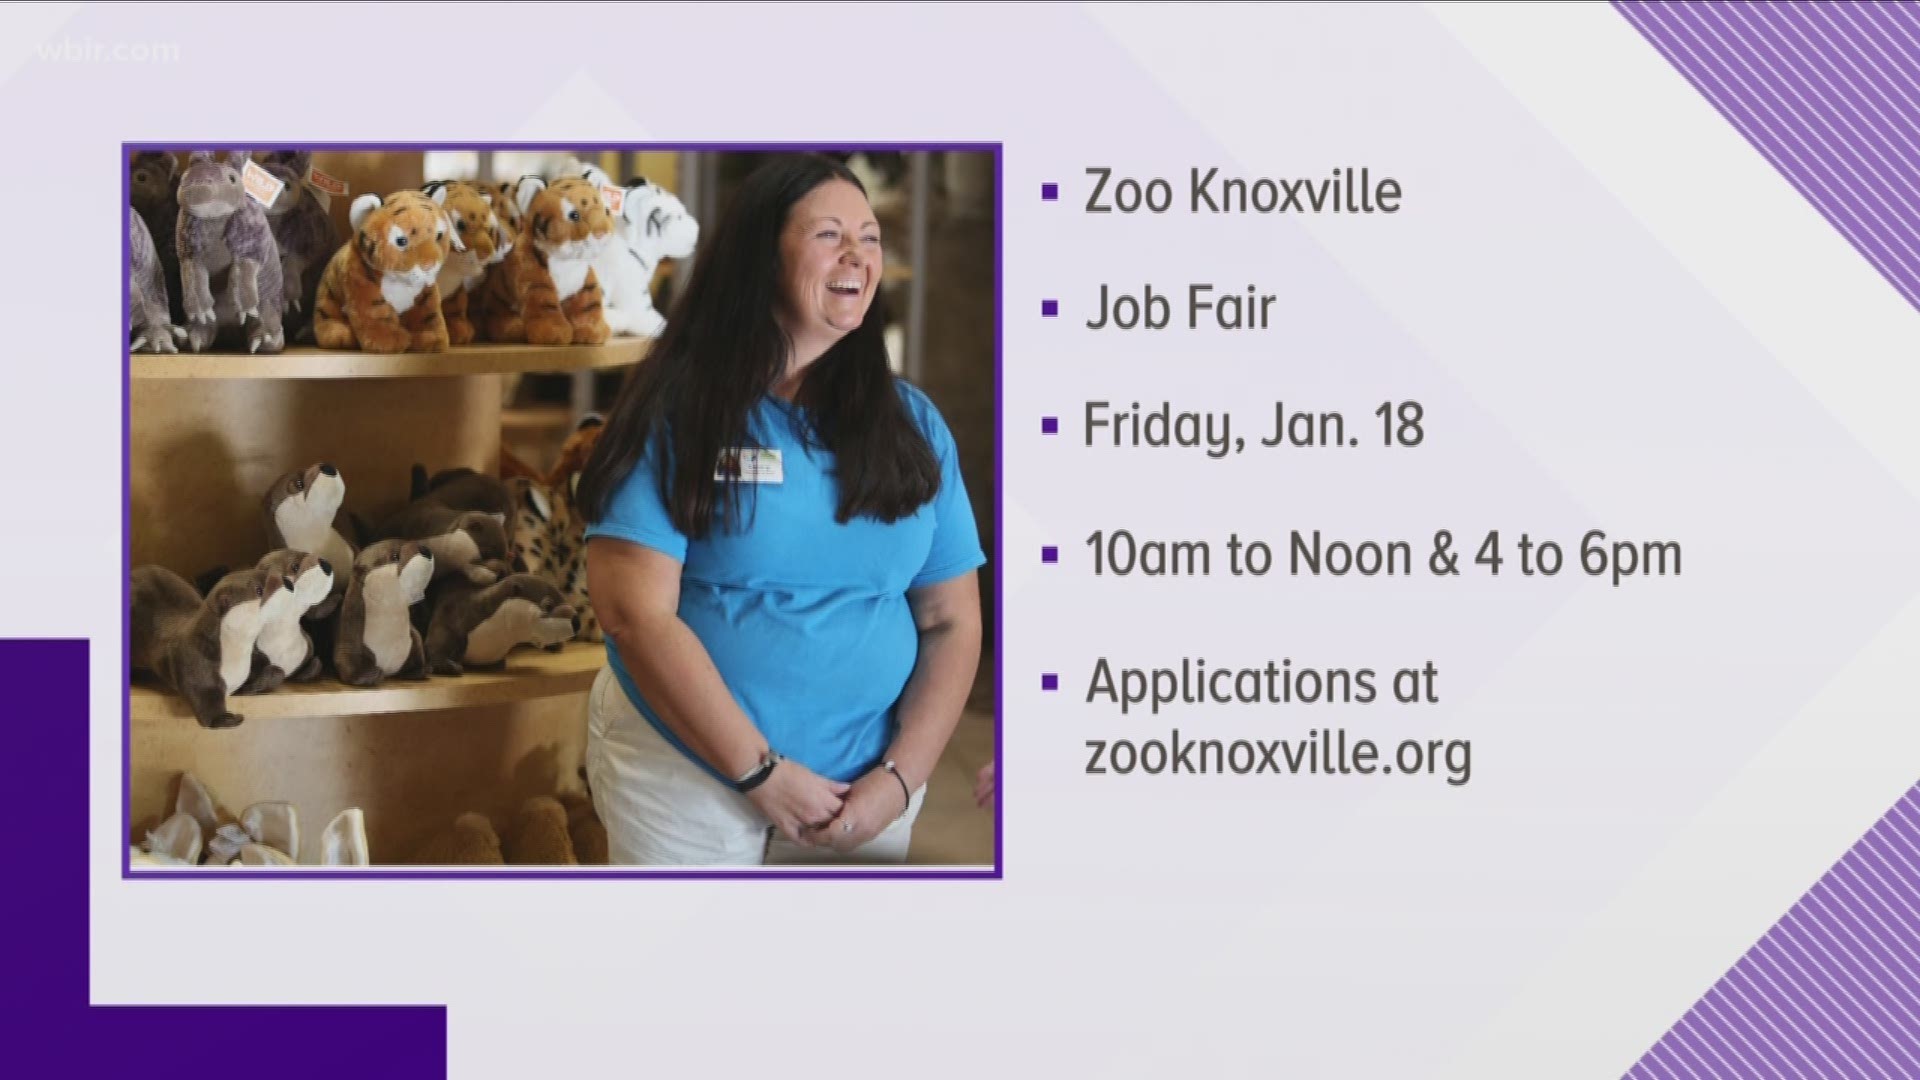 Zoo Knoxville will be accepting applications and interviewing candidates to fill 98 seasonal, variable hour positions on Friday, January 18, 2019.  Applications and interviews will be done in two sessions: 10:00 a.m. – noon and 4:00 p.m. – 6:00 p.m. at Zoo Knoxville. Applicants must be at least 16 years old. Jan. 14, 2019-4pm